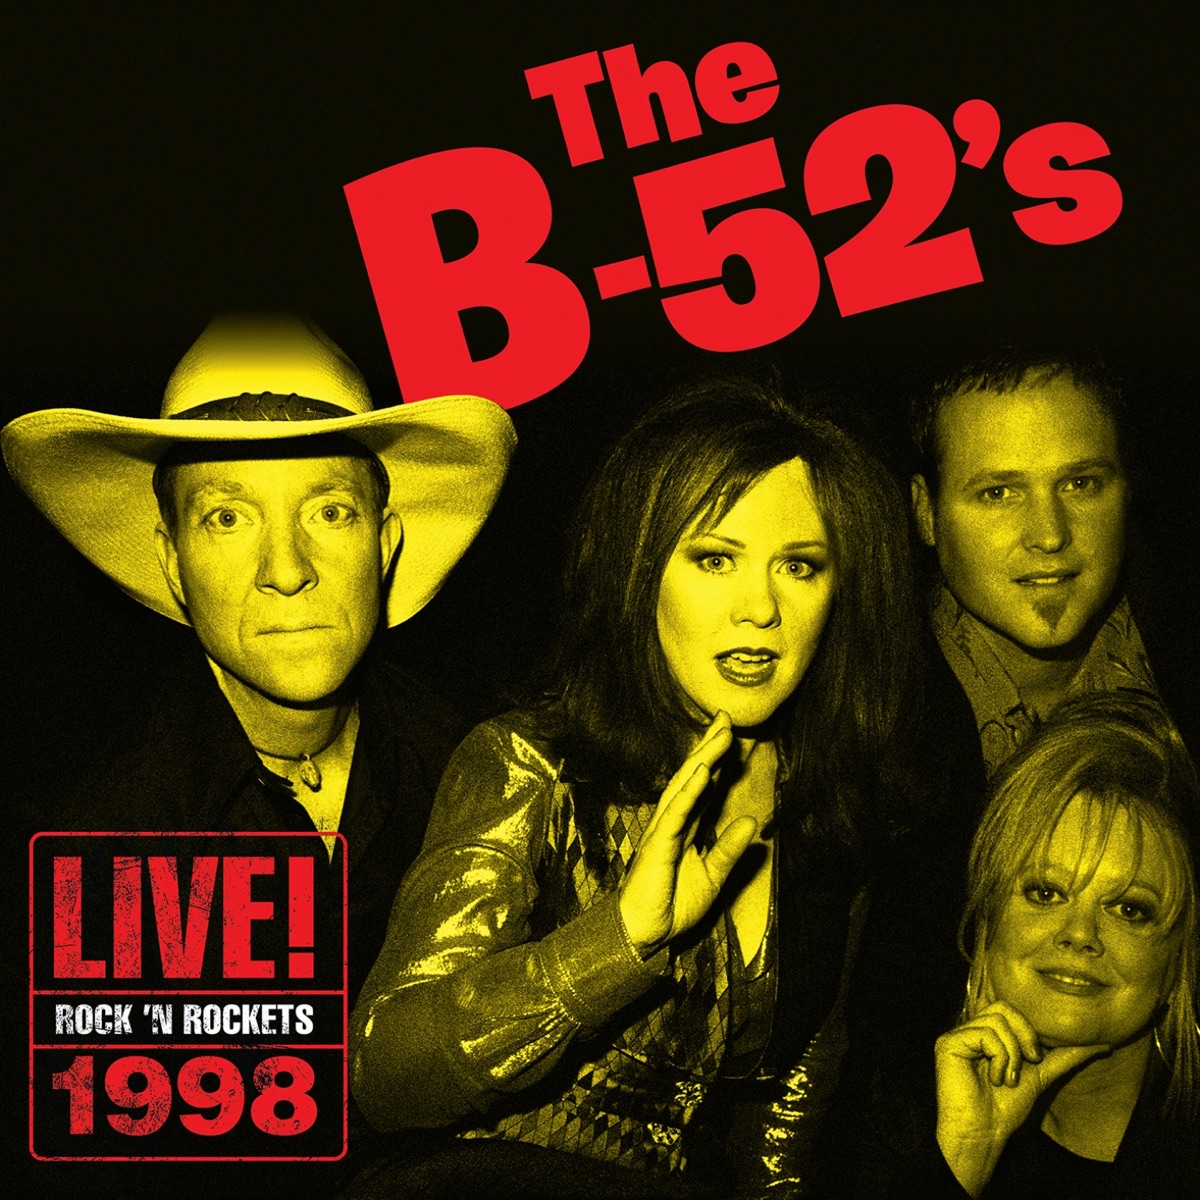 Cosmic Thing - Album by The B-52's - Apple Music